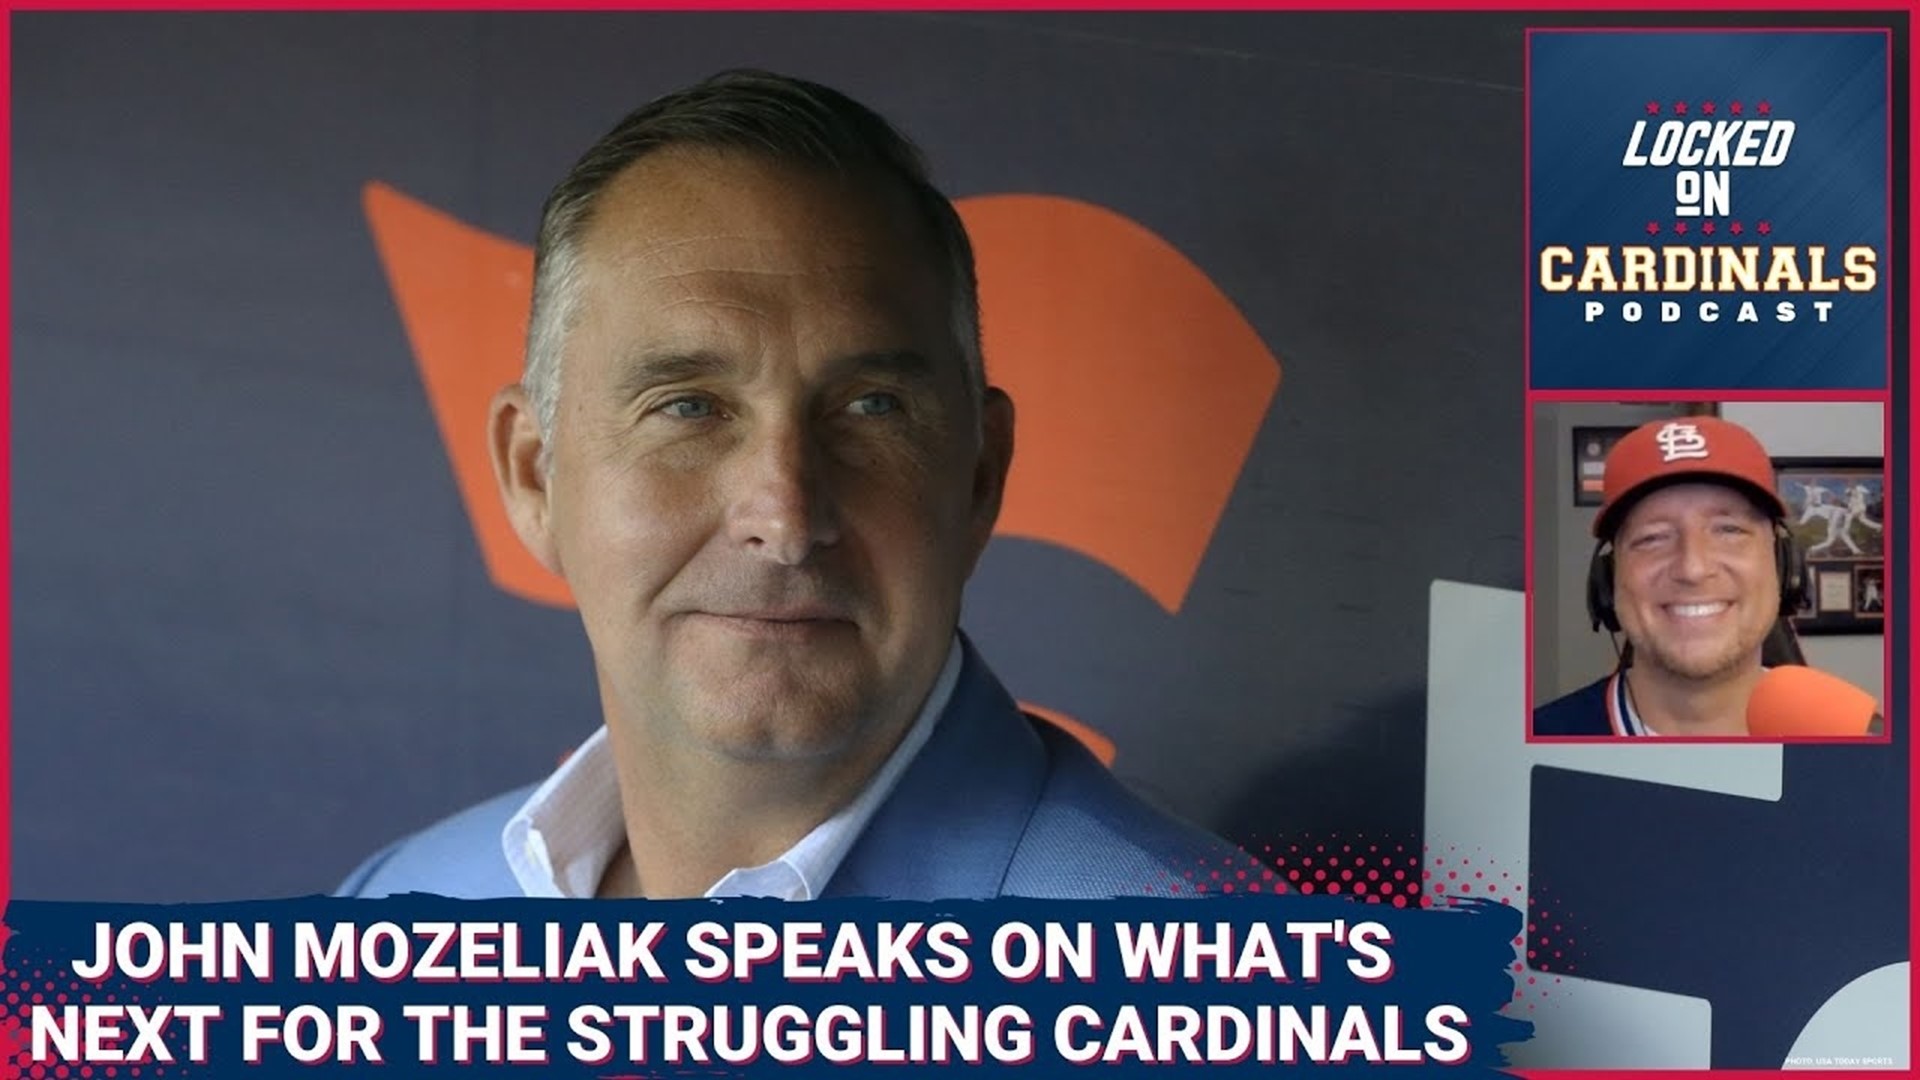 Flaherty Shines Against The Rangers, Mo Speaks On The Current State And Future Of The Team